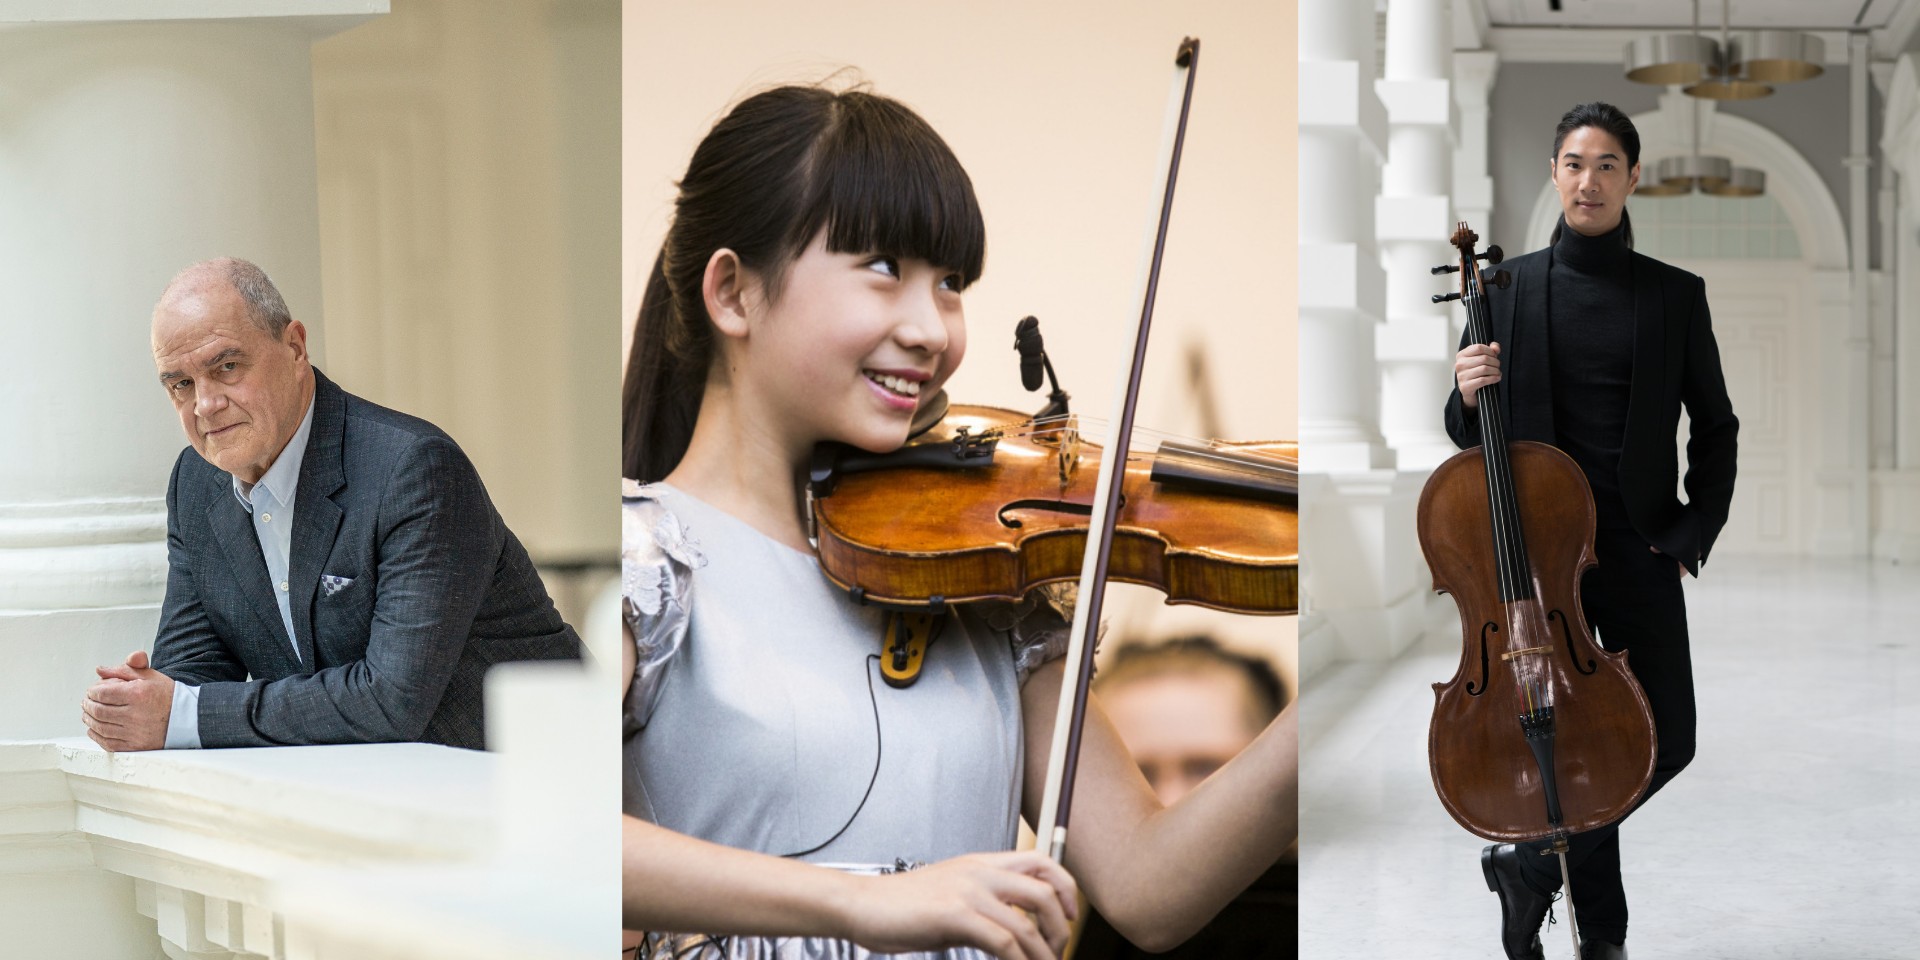 SSO announce new online concerts featuring Chief Conductor Hans Graf, violinist Chloe Chua, and cellist Ng Pei-Sian